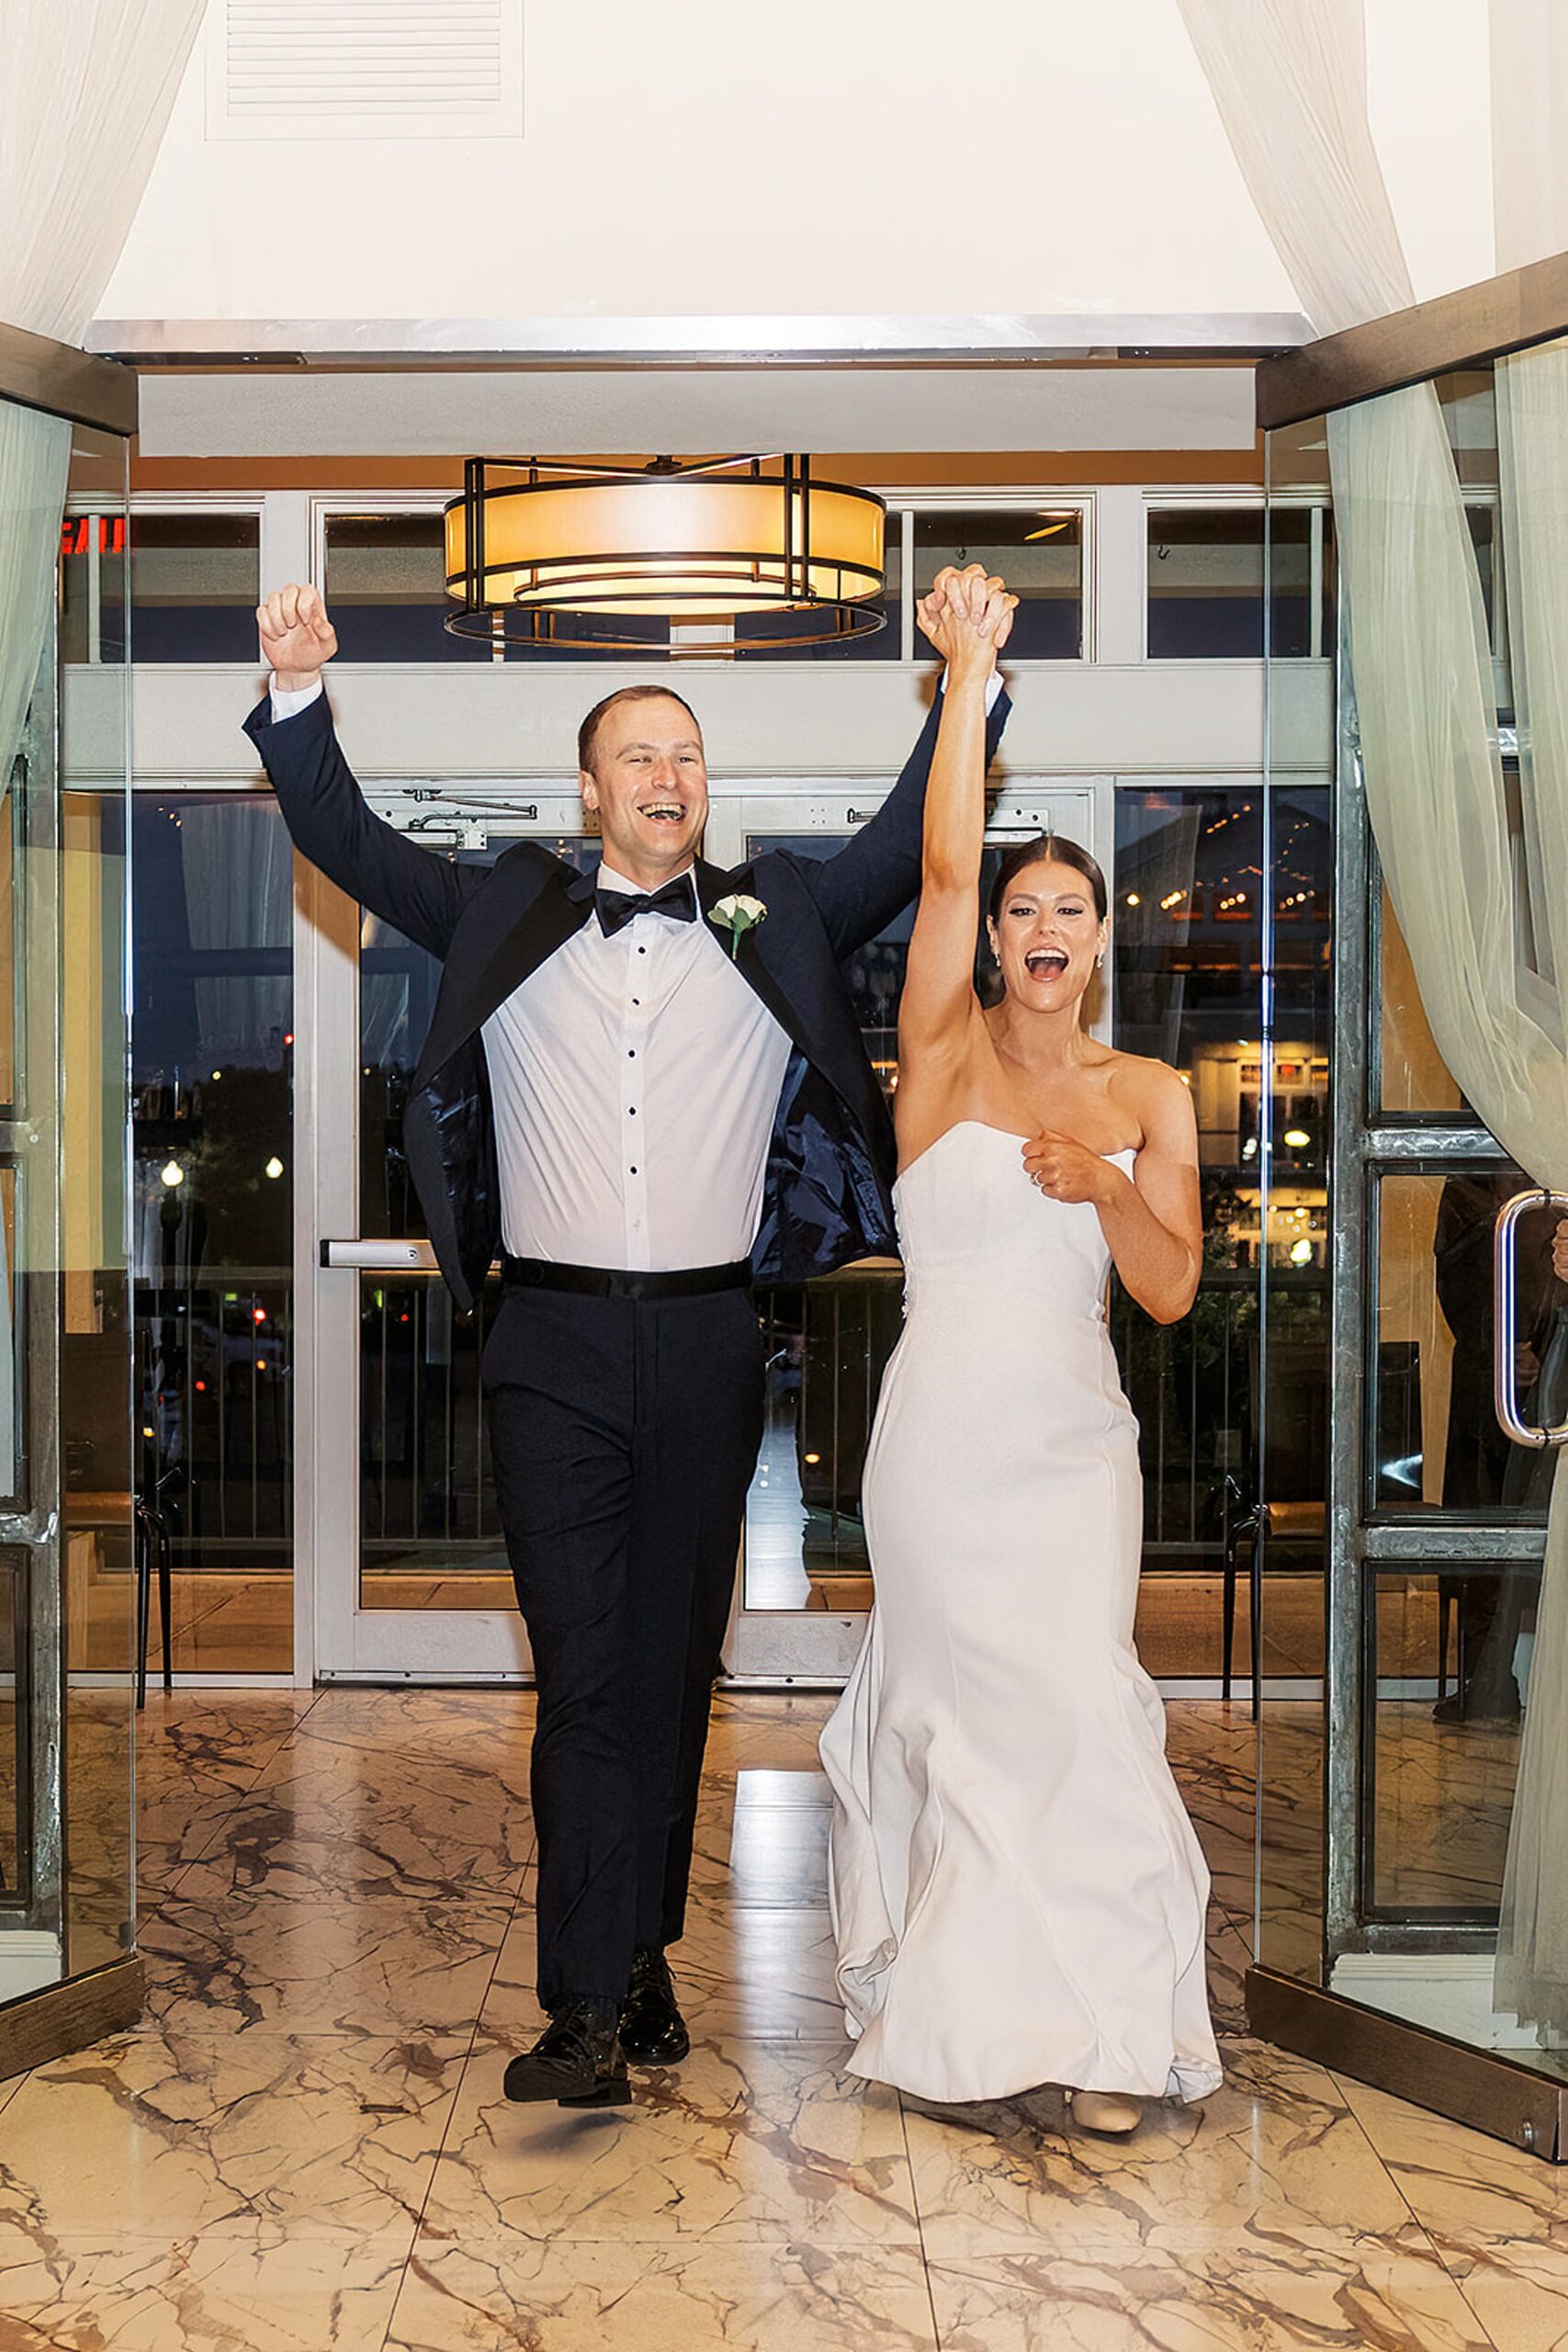 Newlyweds cheer with hands up as they enter their Liberty House Wedding reception